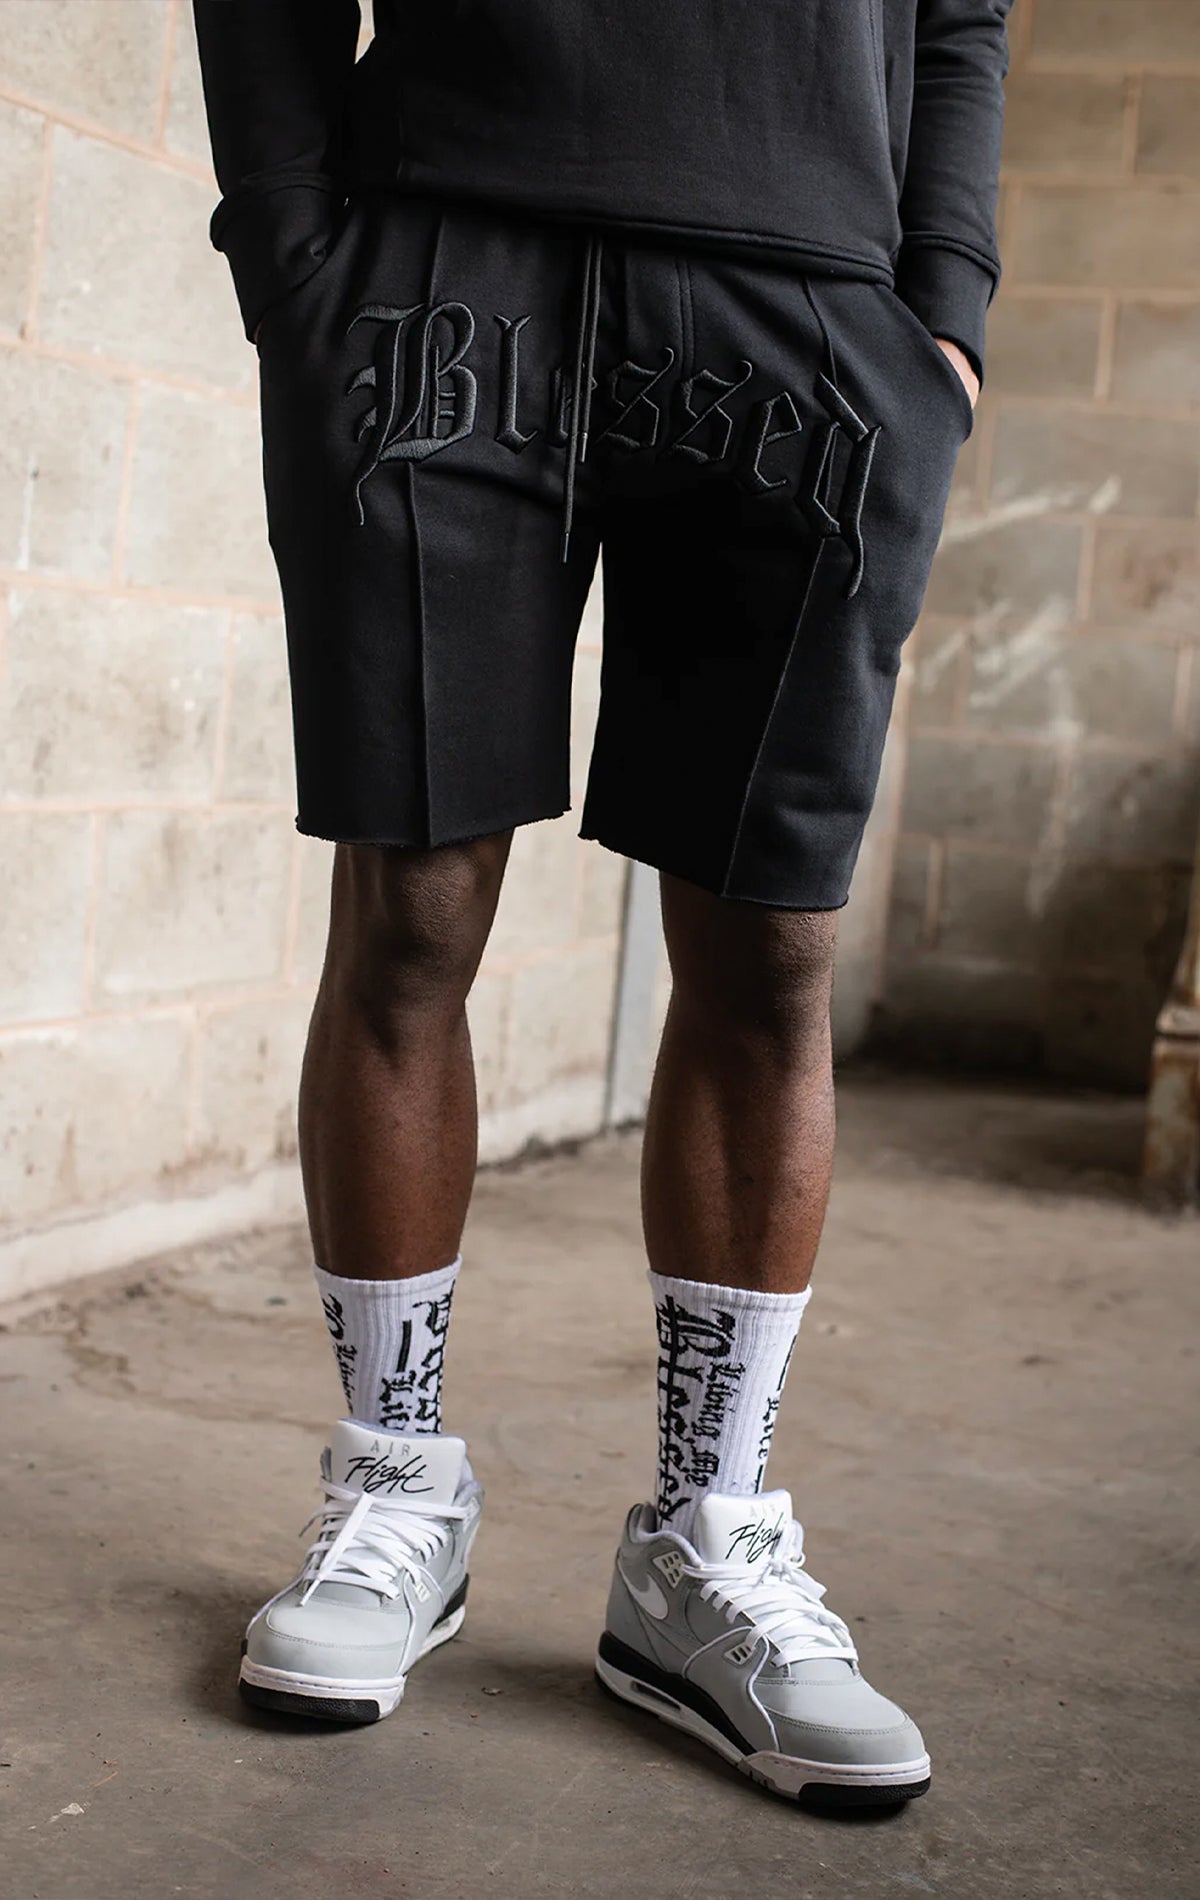 Men's casual, straight-leg shorts in black. The shorts feature a 100% cotton fabric, an arched 3D embroidered 